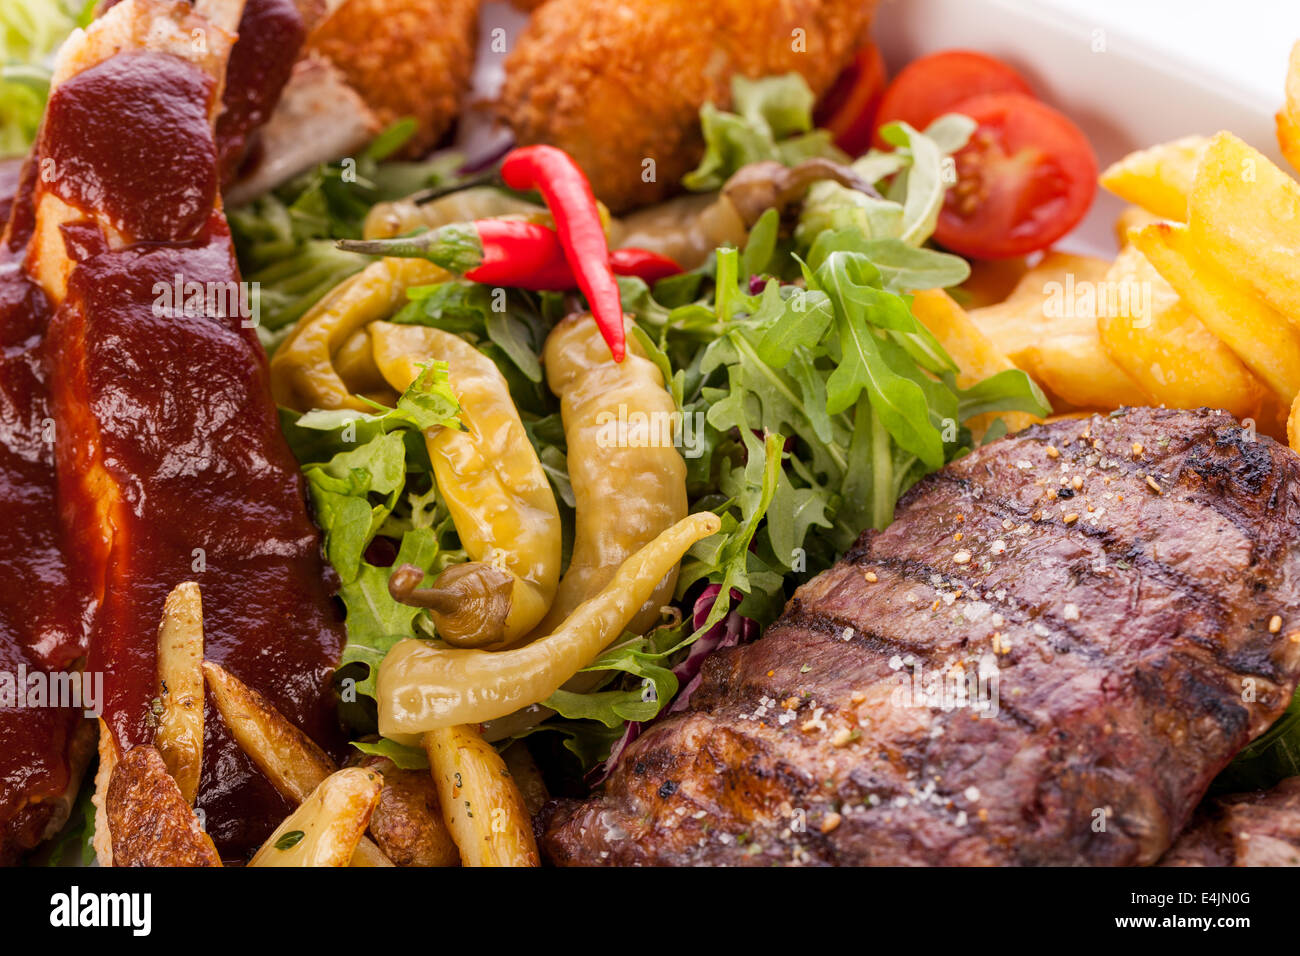 Wholesome platter of mixed meats including grilled steak, crispy crumbed chicken and beef on a bed of fresh leafy green mixed salad served with French fries and chutney or BBQ sauce in a dish Stock Photo